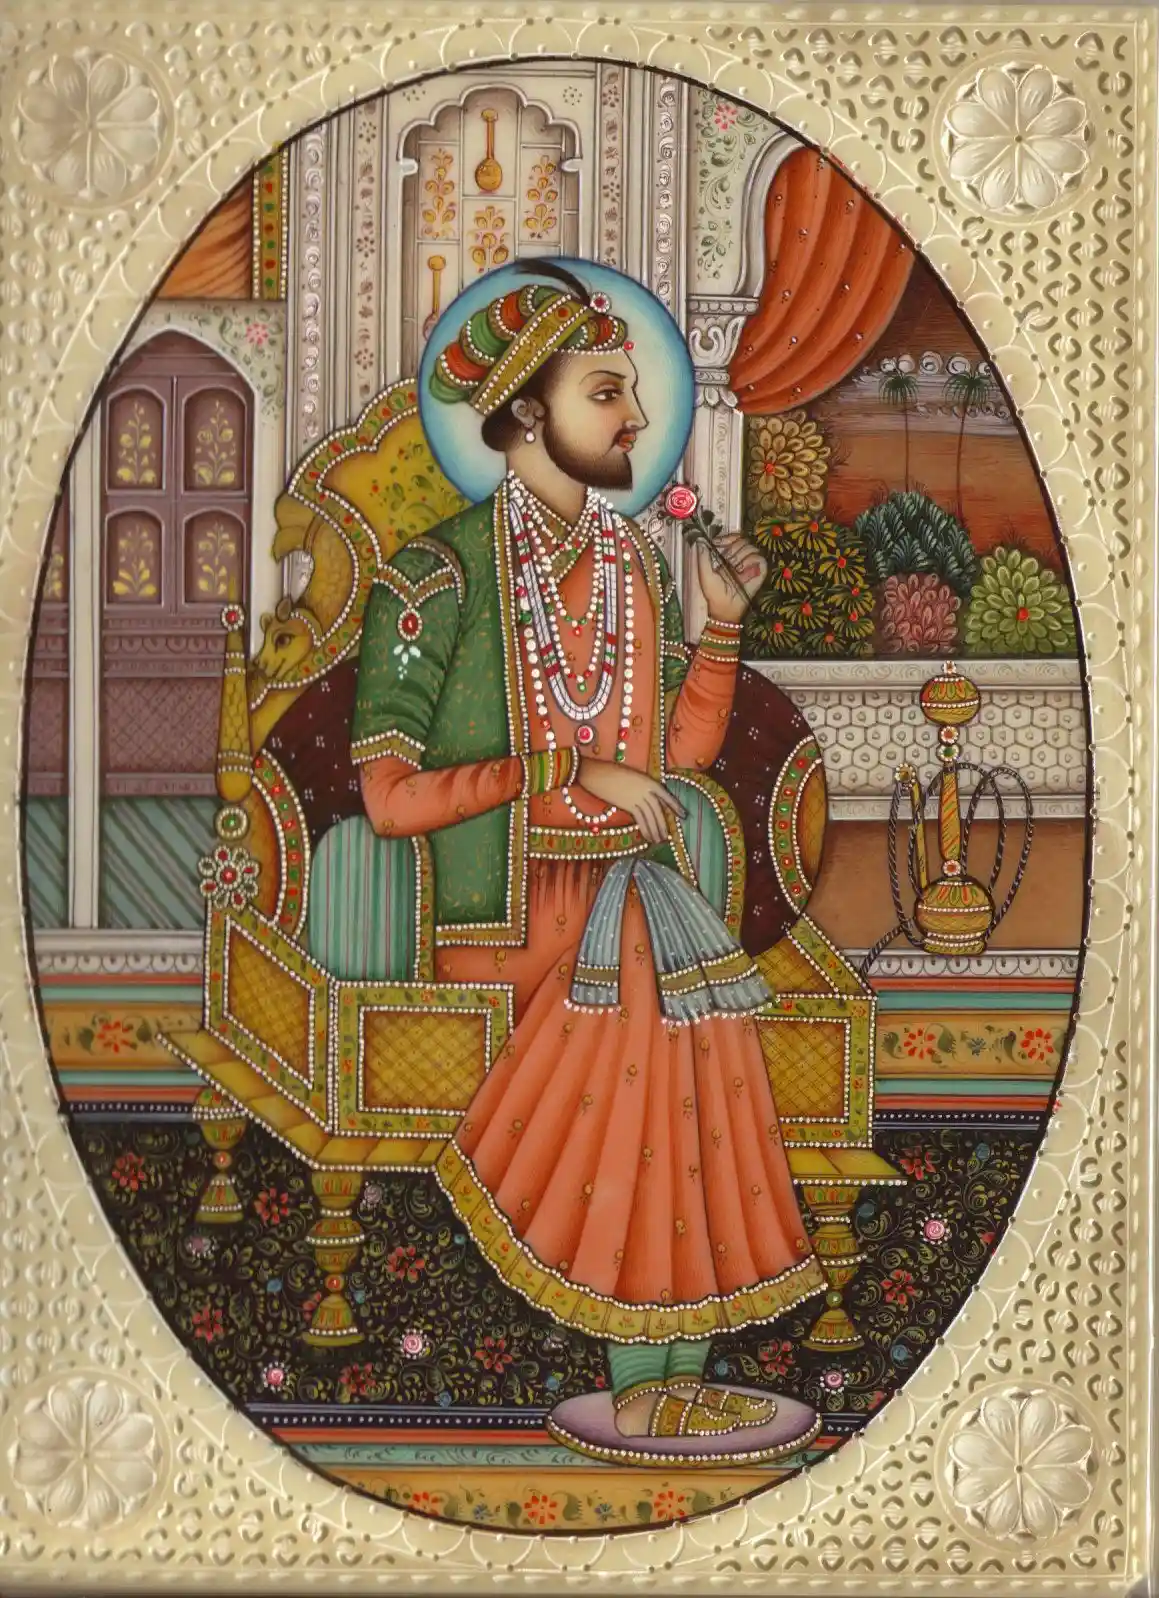 An illustration of Shahjahan, the founder of Shahjahanabad. Source: Pinterest 